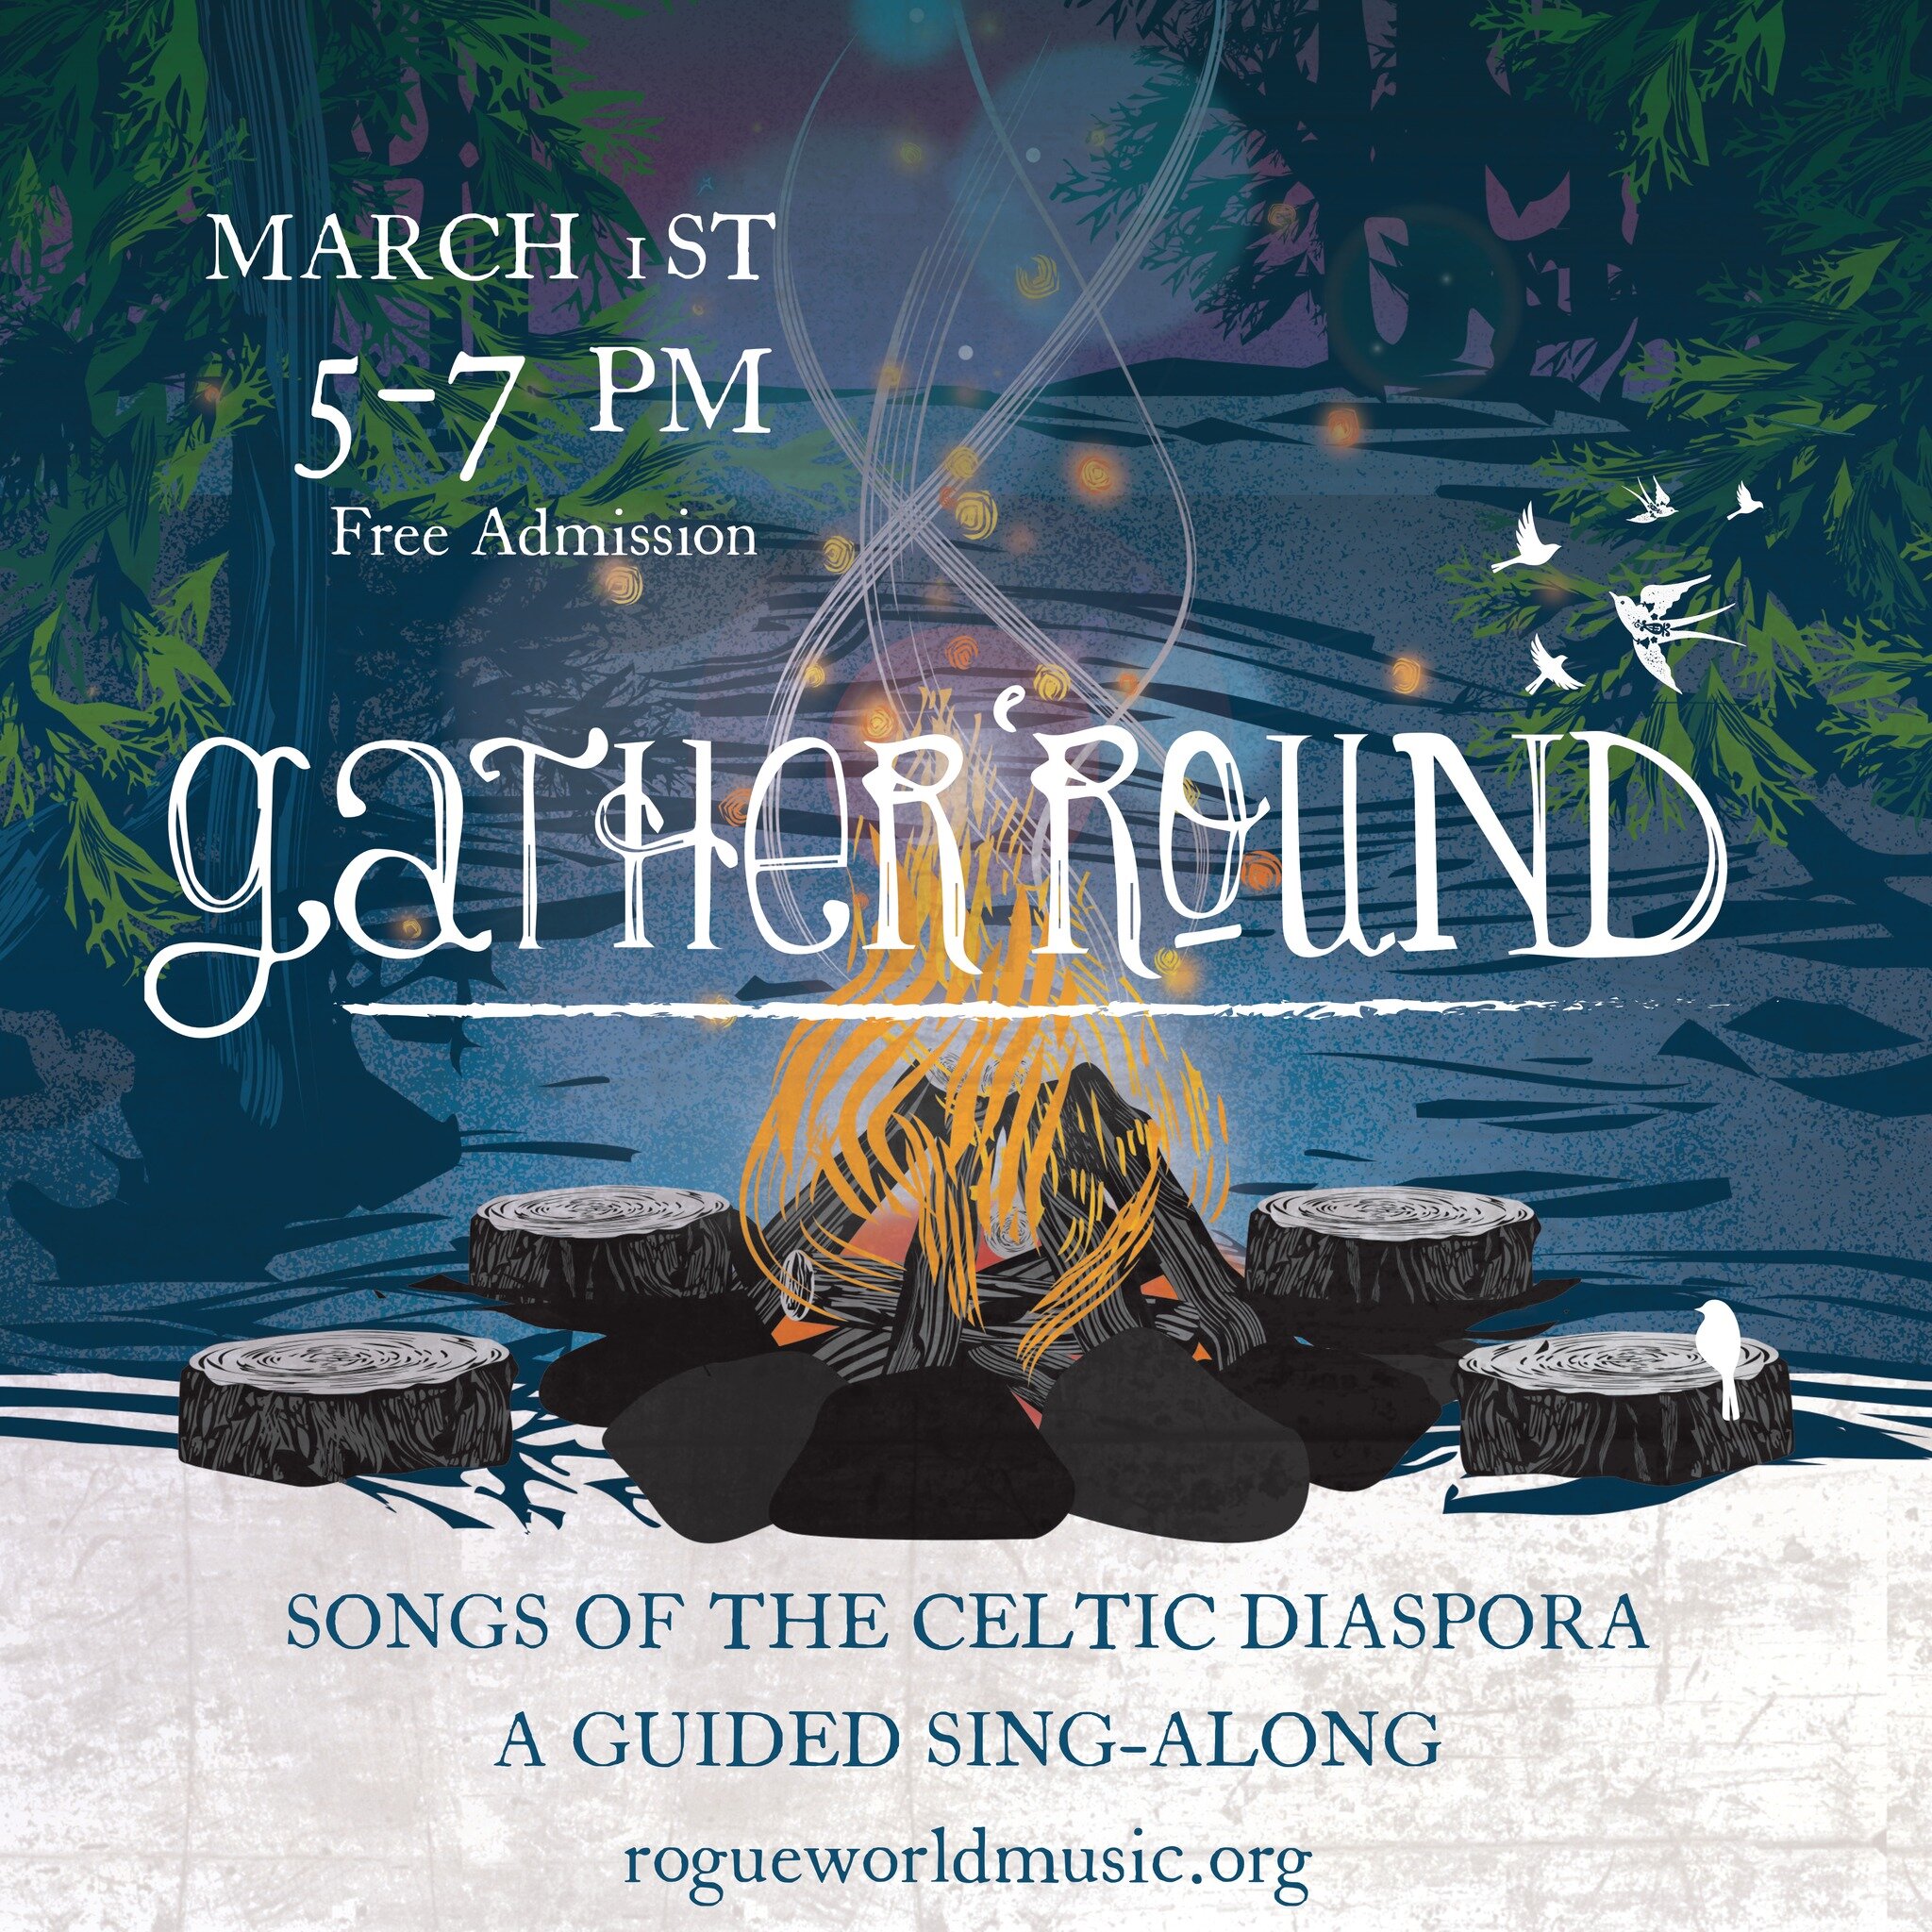 Join us for a rollicking-good time at our March Gather 'Round featuring songs of the Celtic diaspora with Rogue World Music's own Travis Puntarelli. Singing along encouraged and supported with lots of call-and-response songs. Come for the whole event